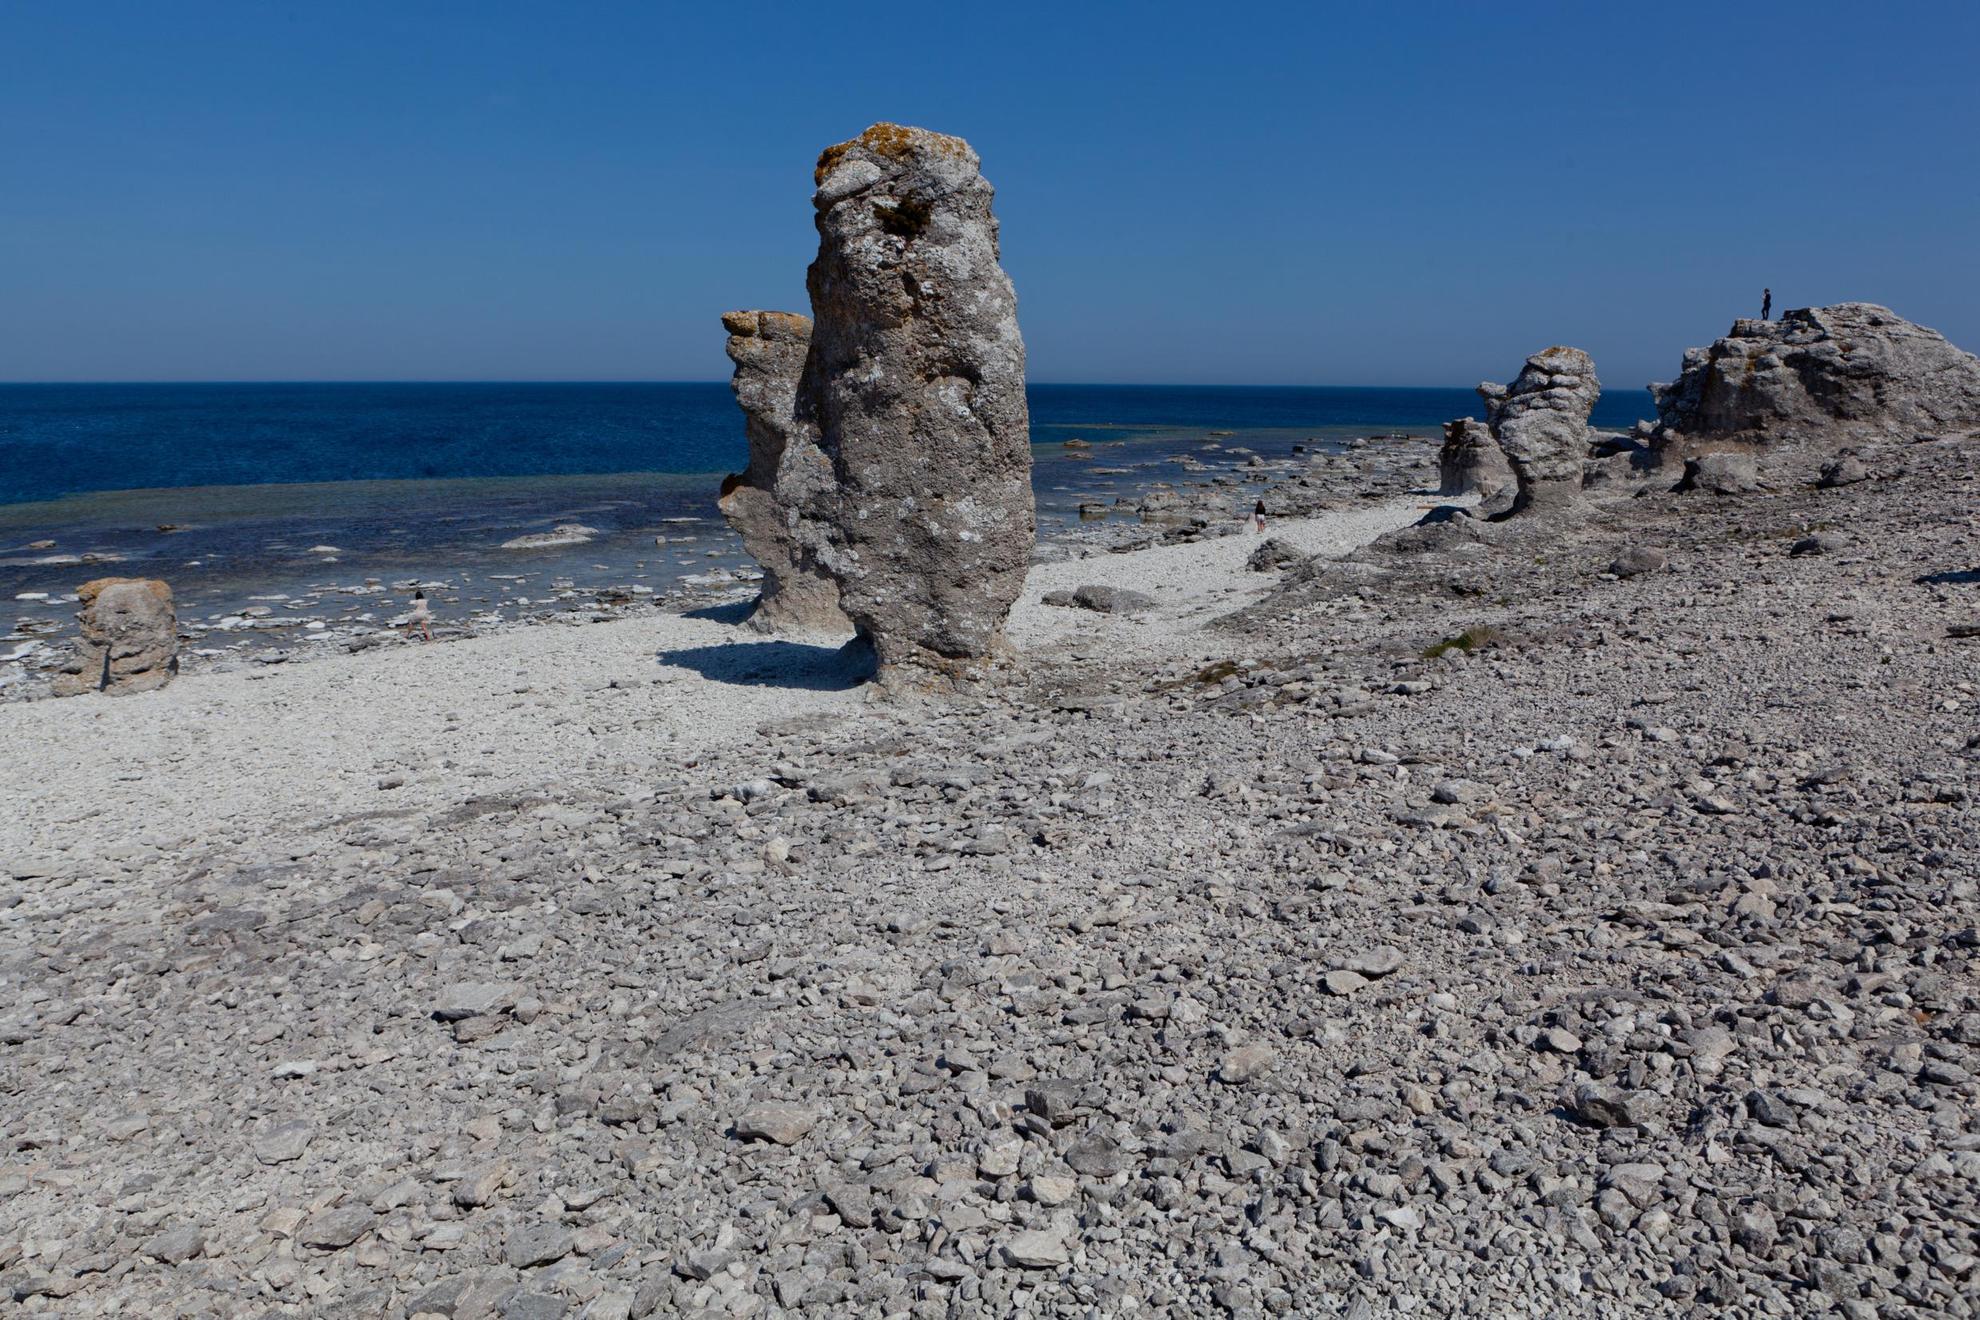 Limestone monoliths on a rocky beach in Gotland. A man stands on one of the rocks, looking out over the ocean.